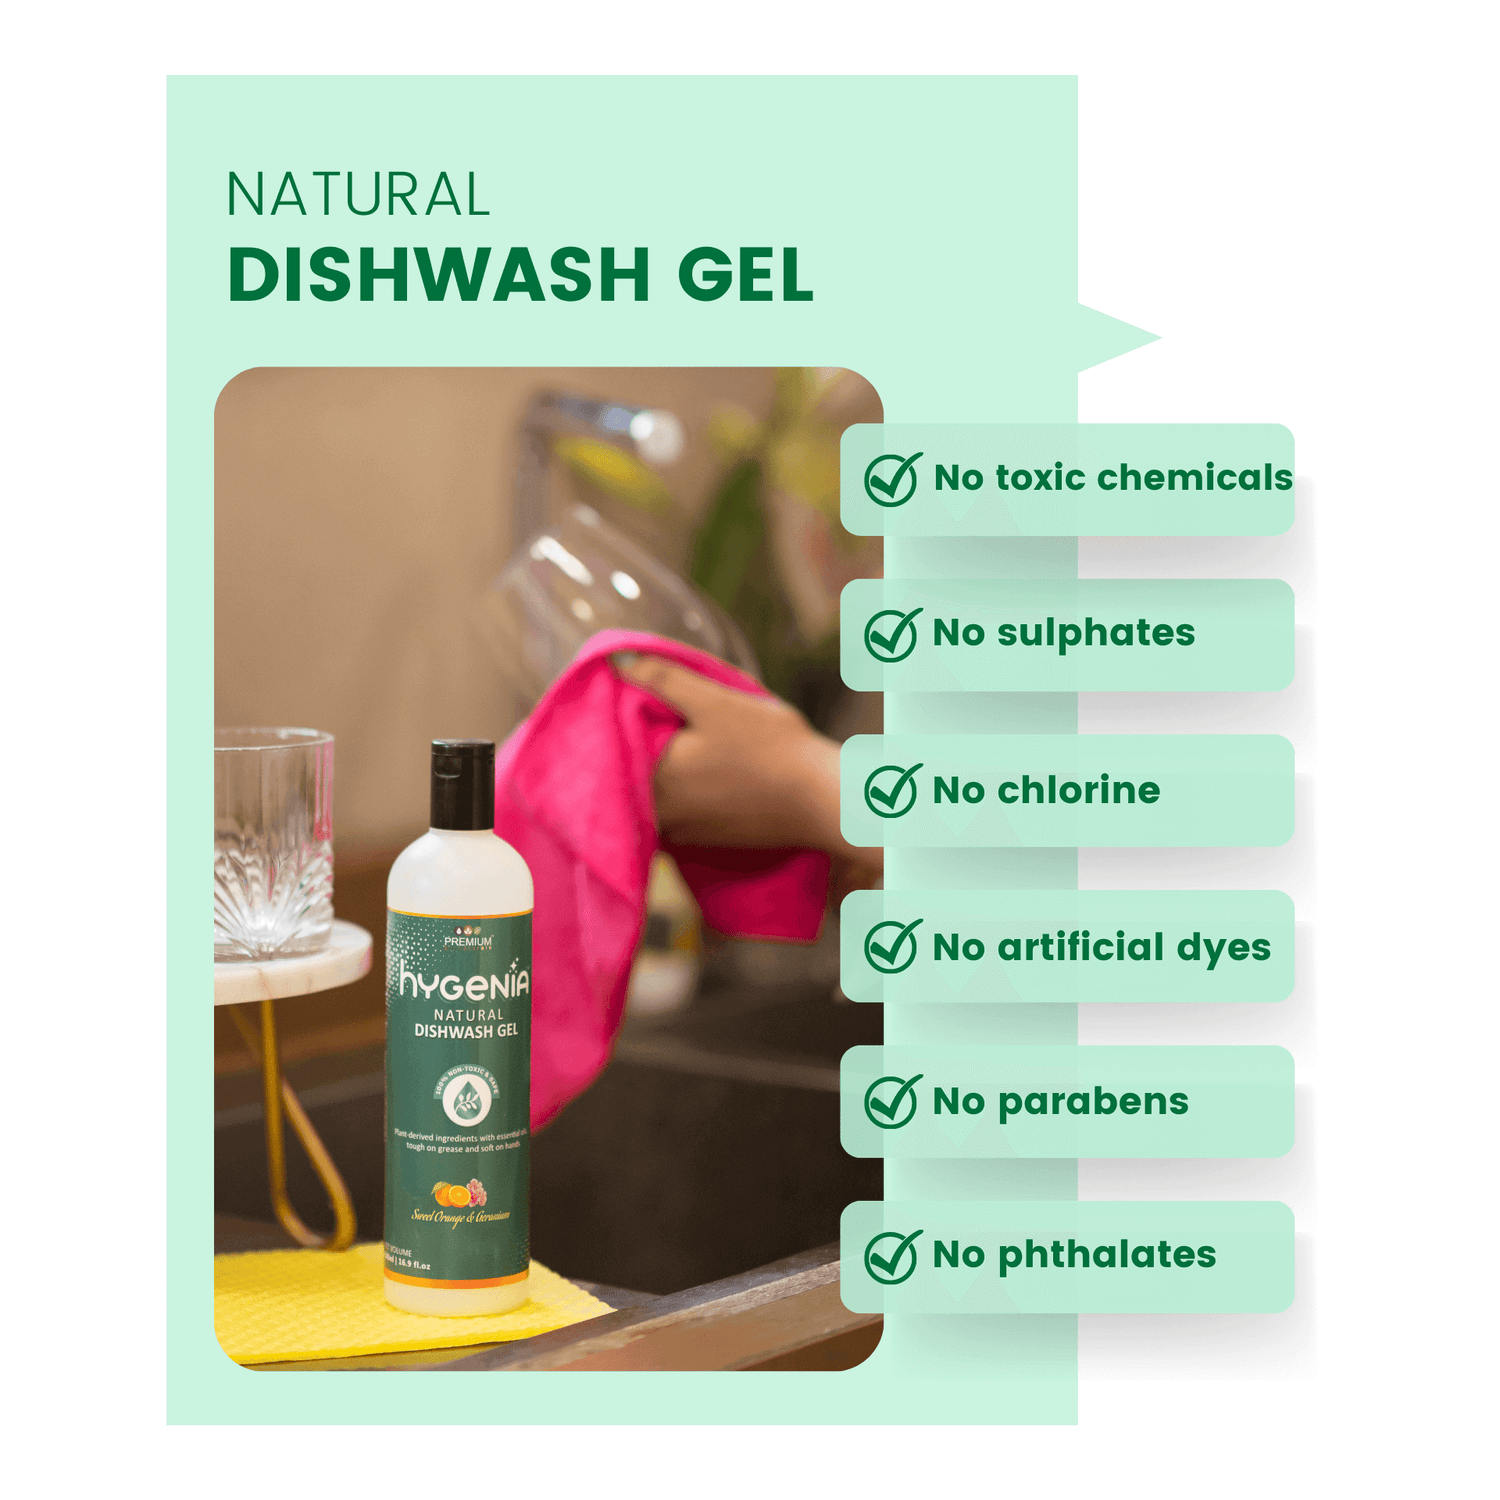 Harness the power of natural ingredients for a cleaner, greener dishwashing experience.